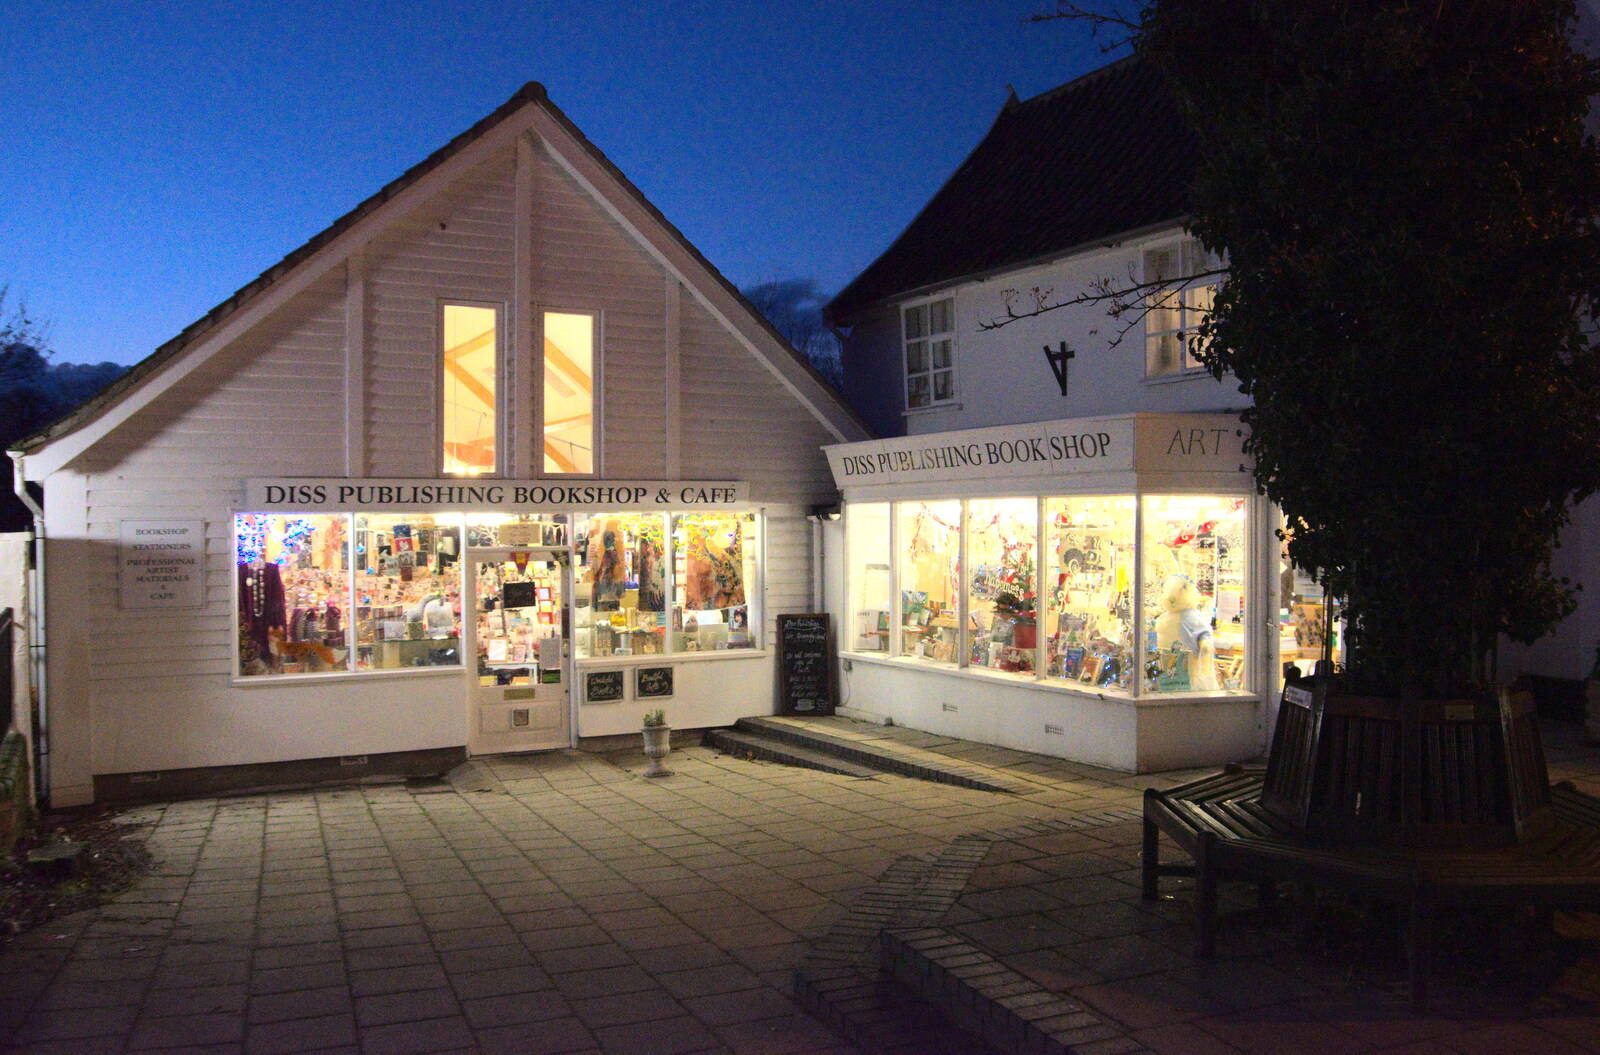 The Diss Publishing bookshop in the dusk from A Return to the Oaksmere, Brome, Suffolk - 8th December 2020